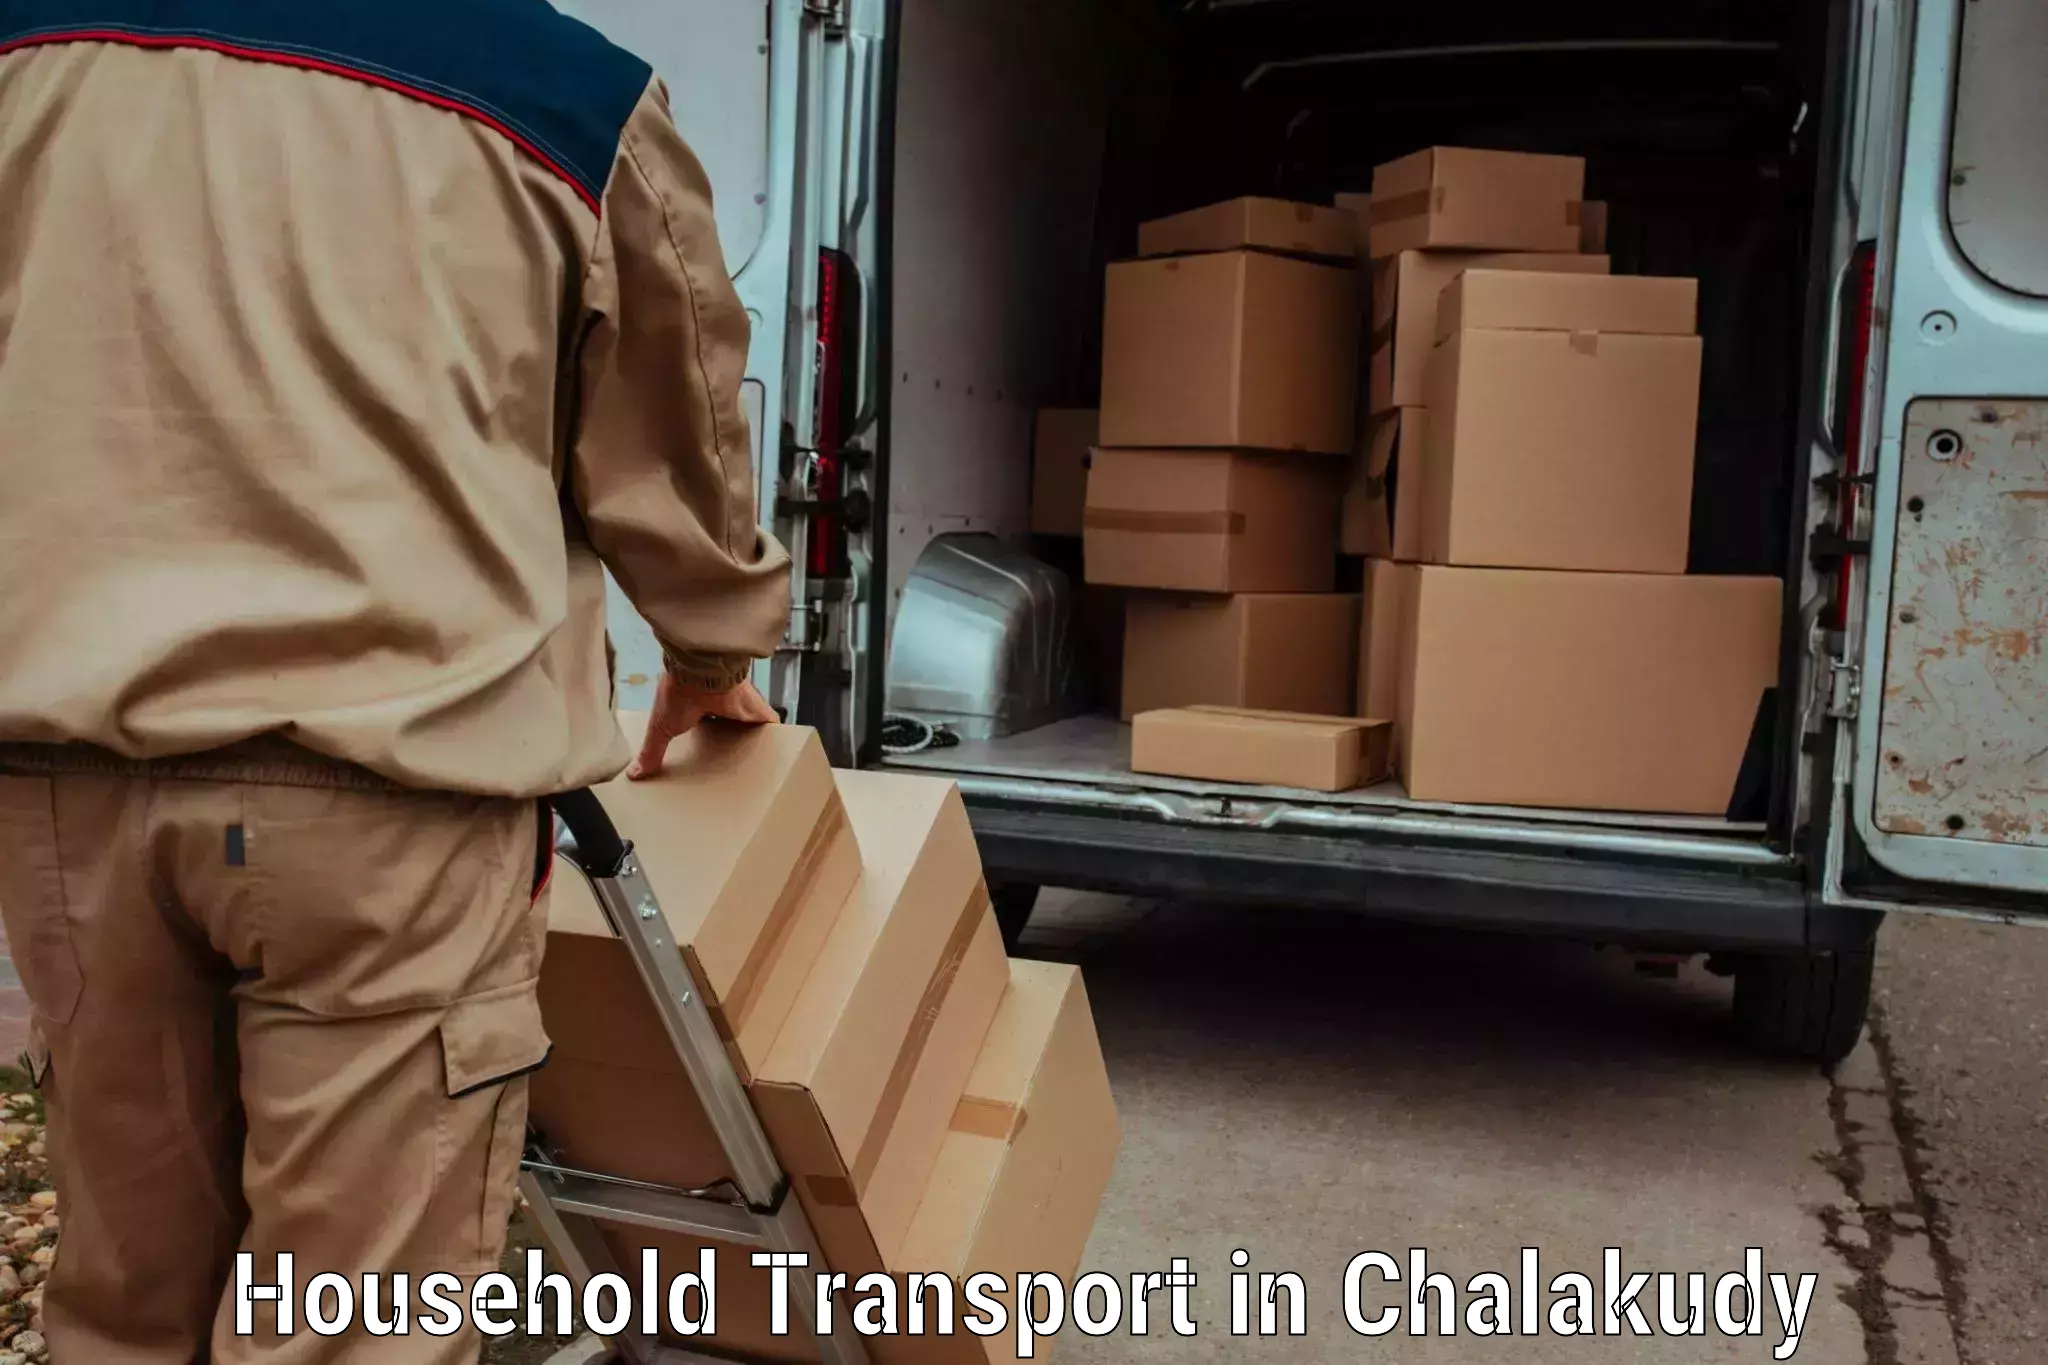 Furniture transport services in Chalakudy